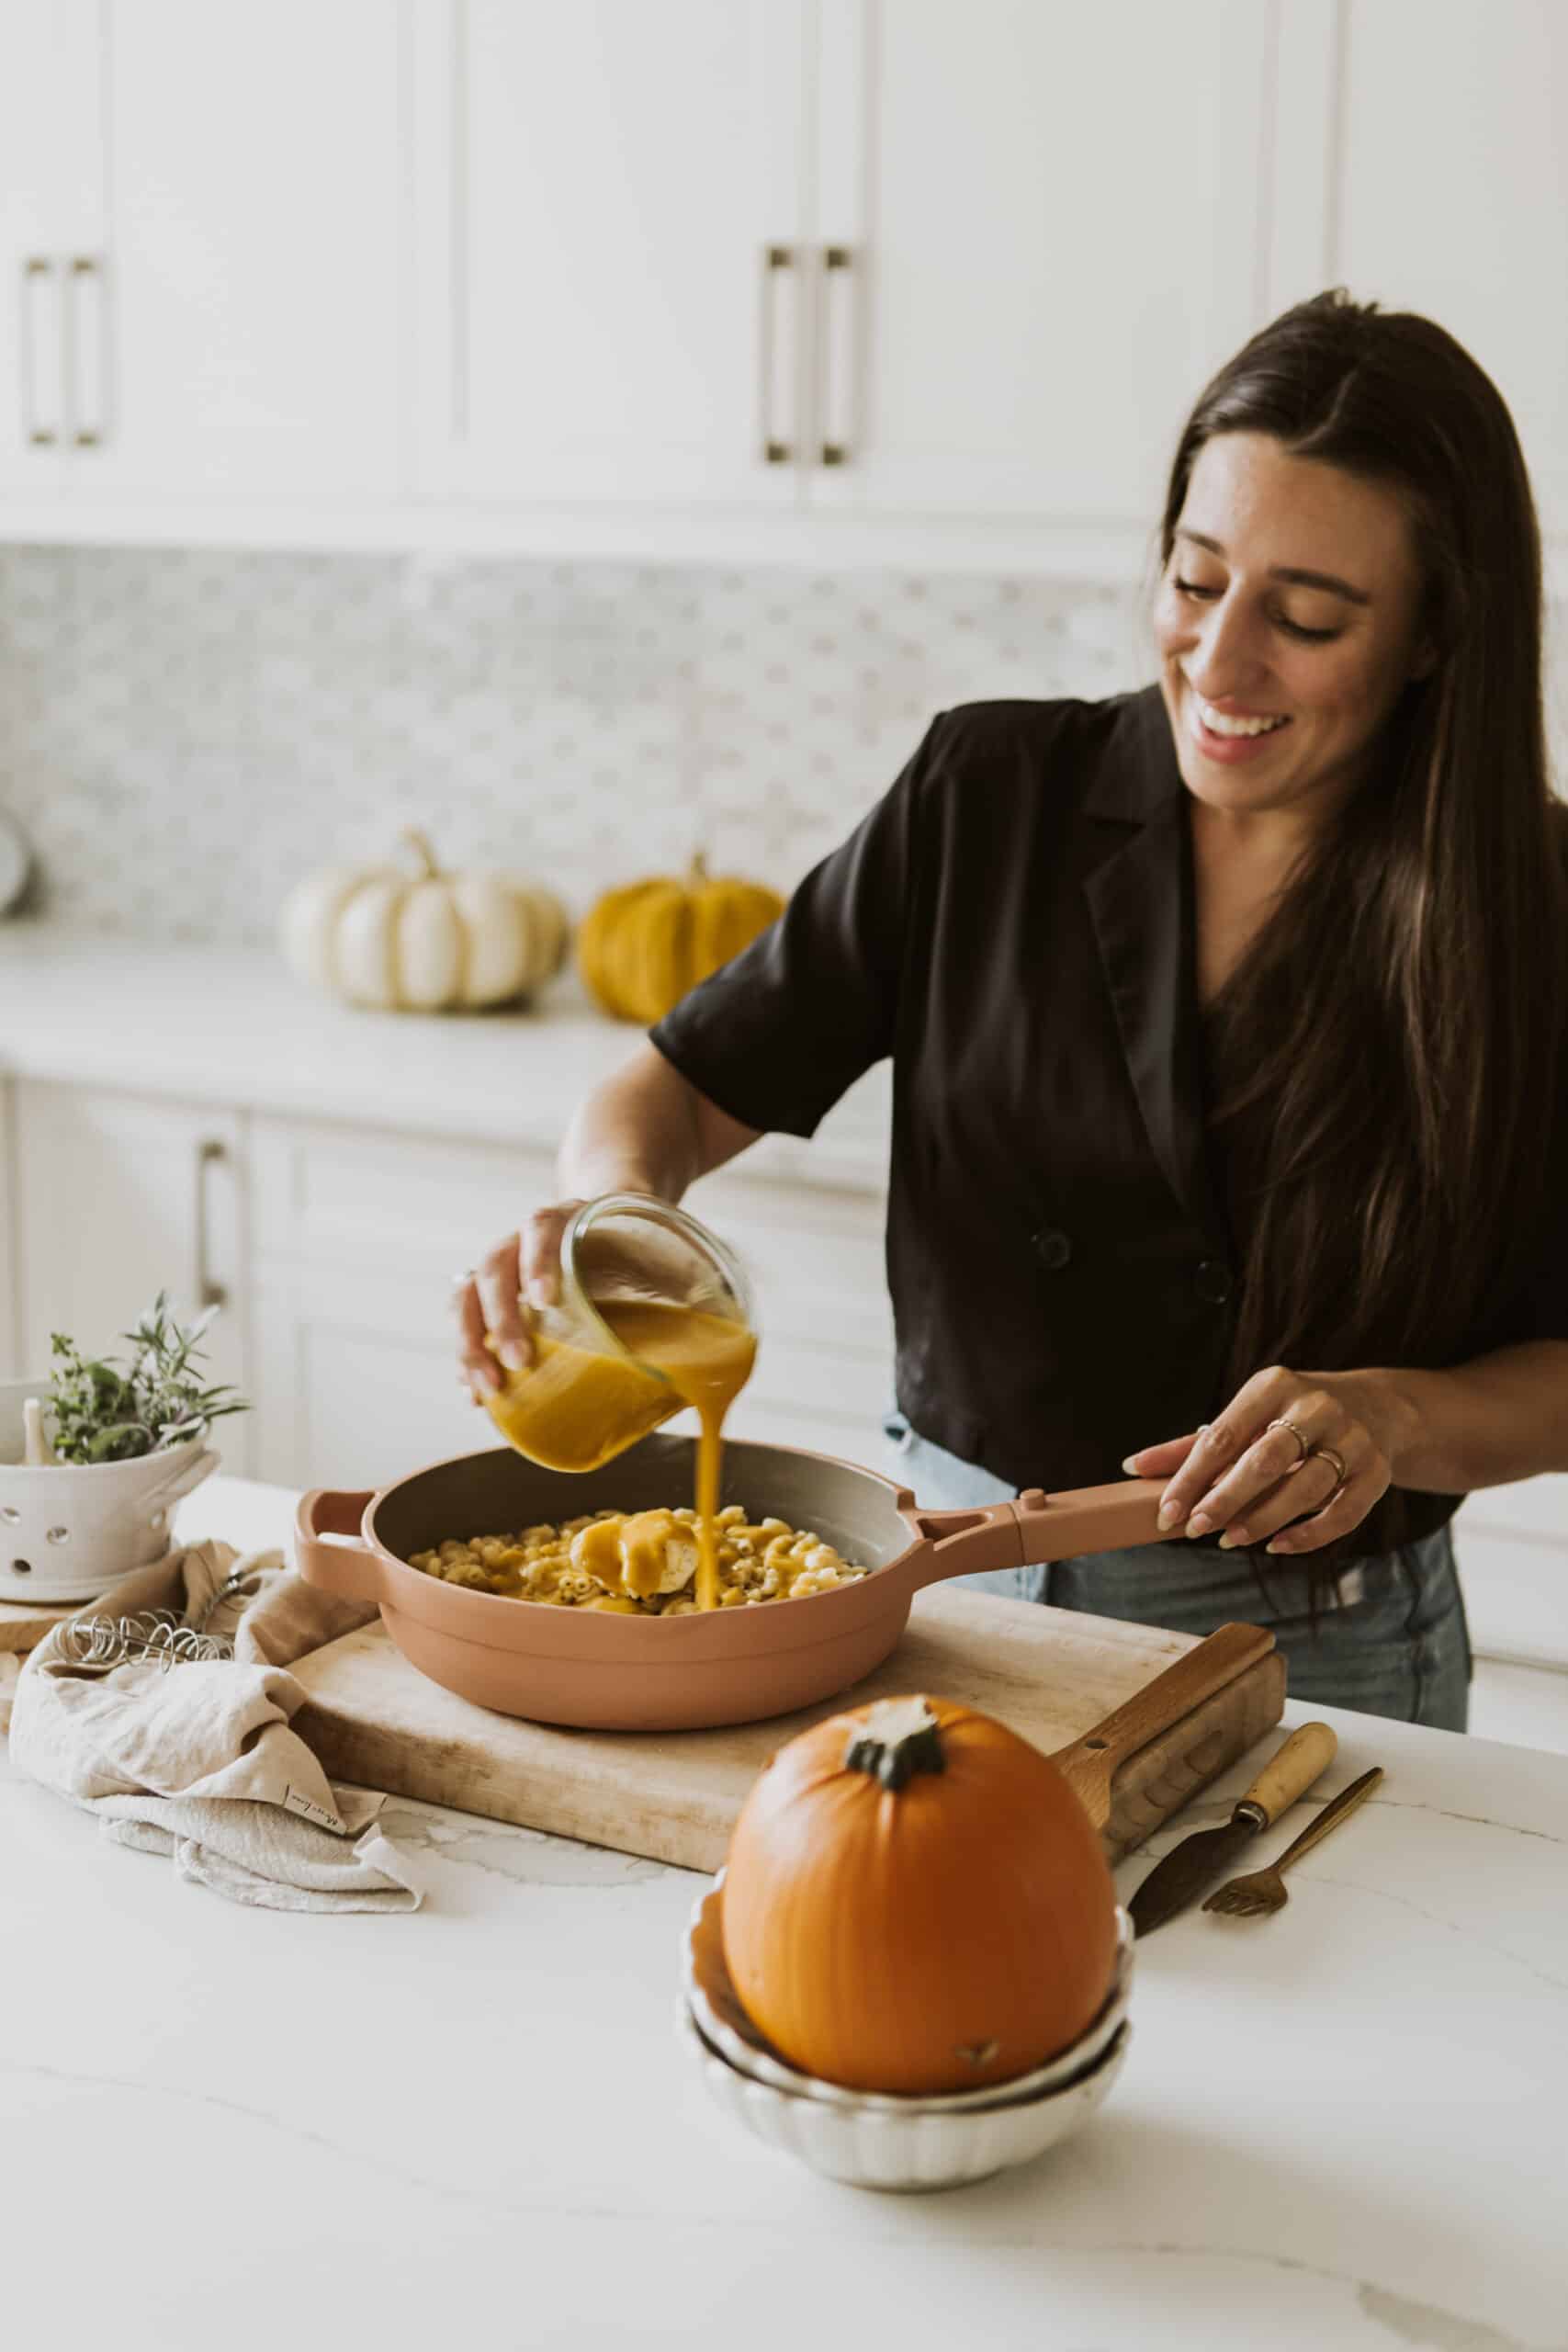 Maria pouring sauce in the Vegan Pumpkin Mac and Cheese